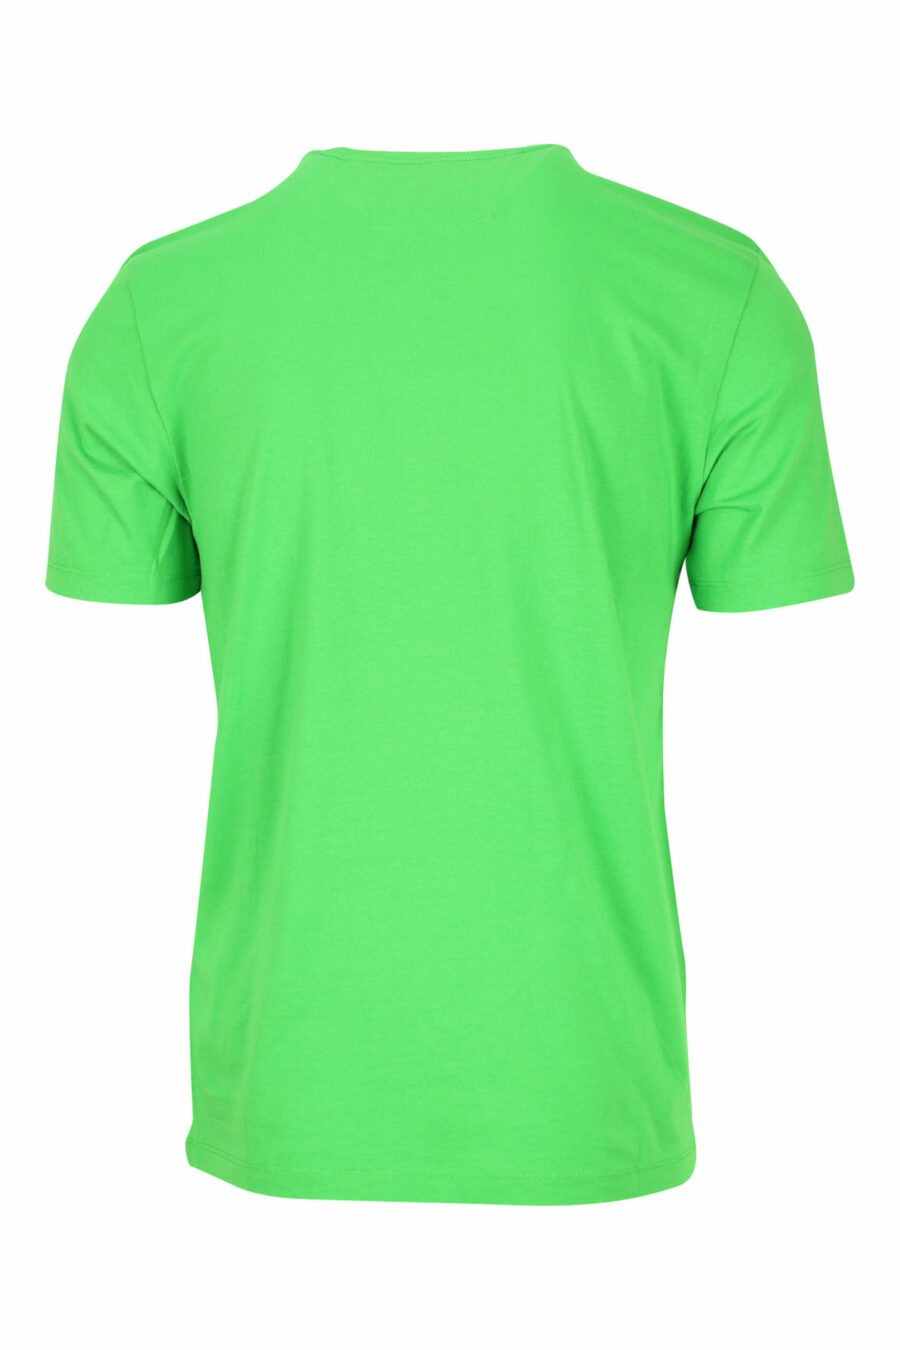 Green T-shirt with graphic maxilogo - 7620943560626 1 scaled